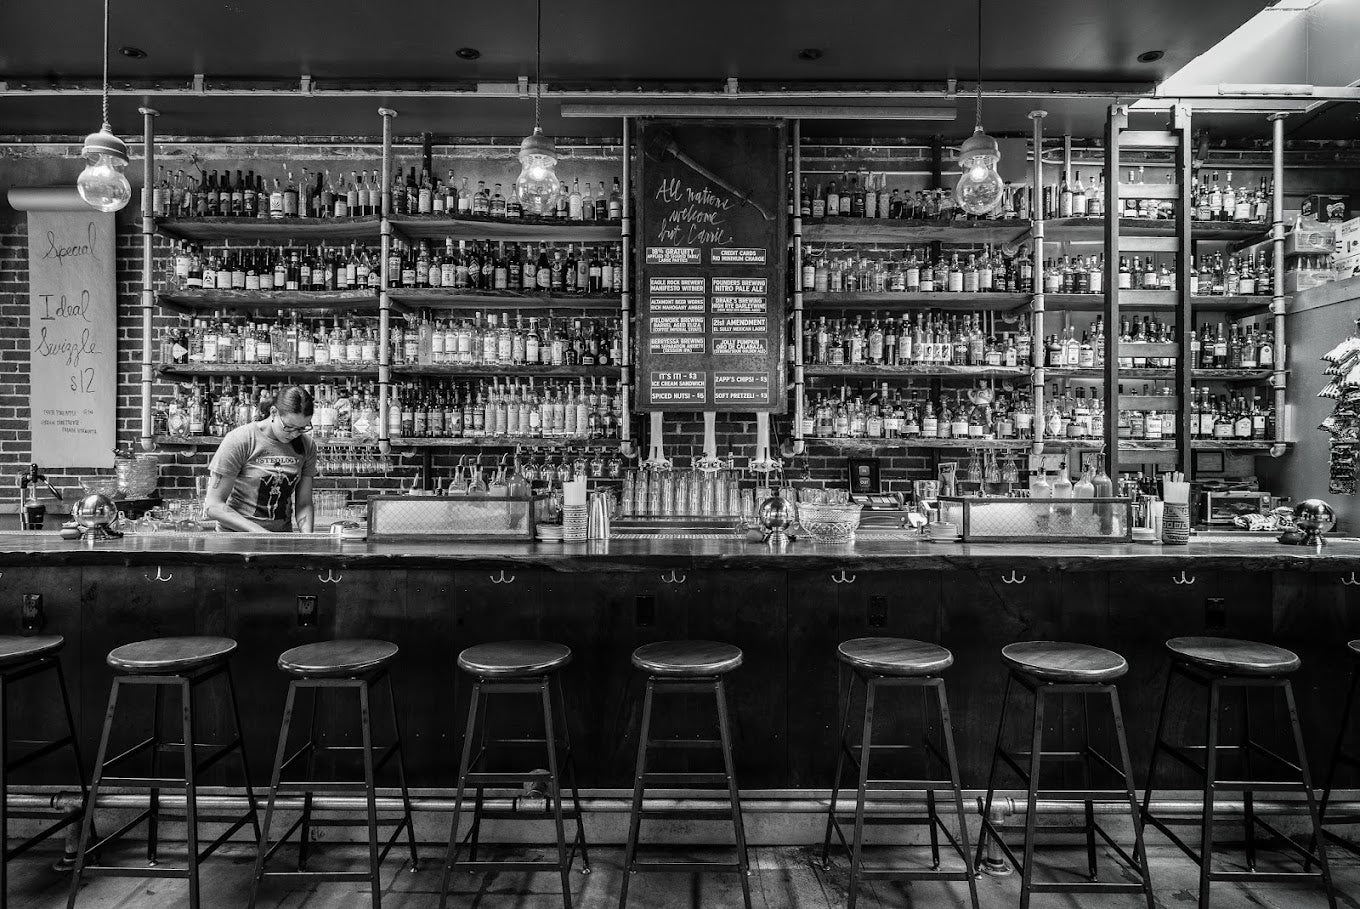 Black and white image of the Prizefighter bar with a bartender standing behind it